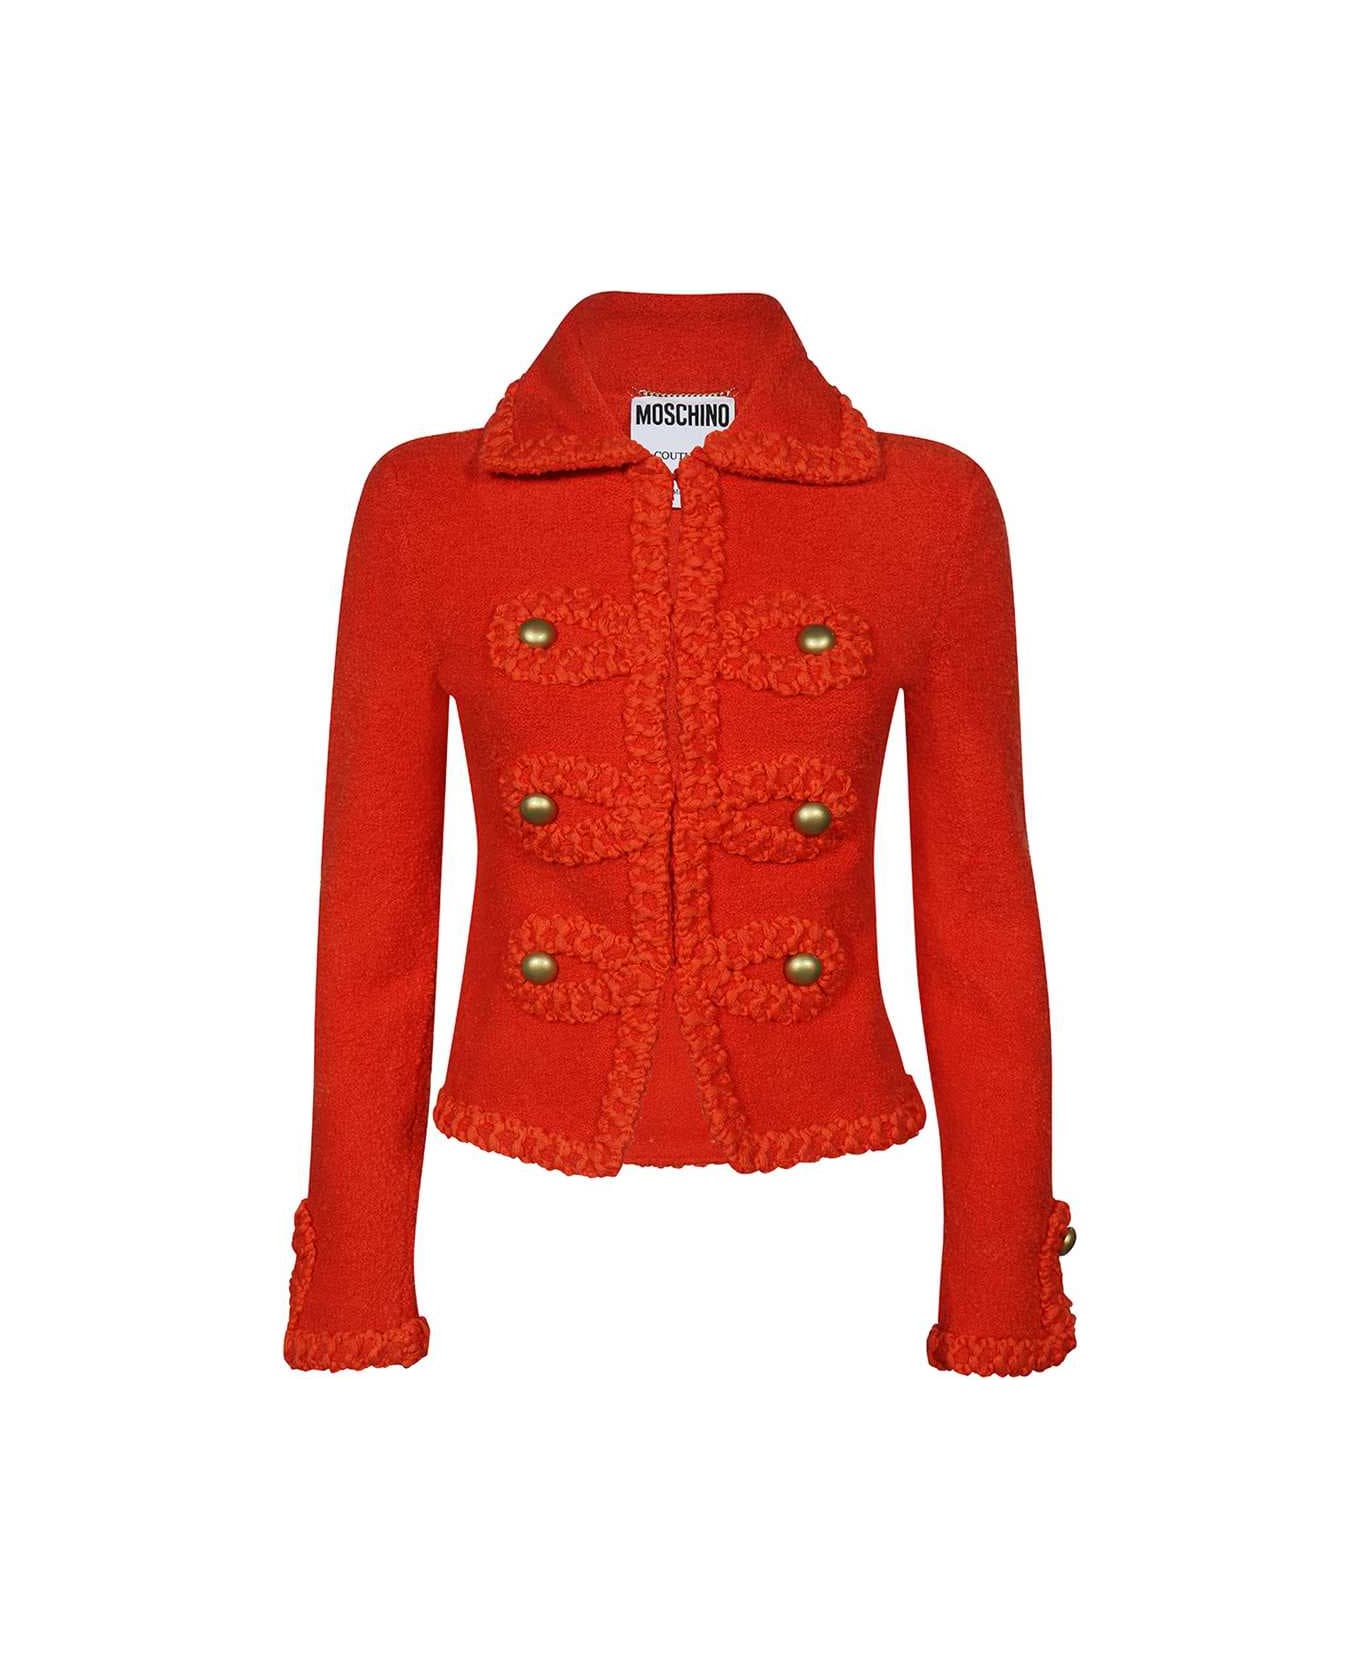 Moschino Single-breasted Cotton Blazer - red カーディガン